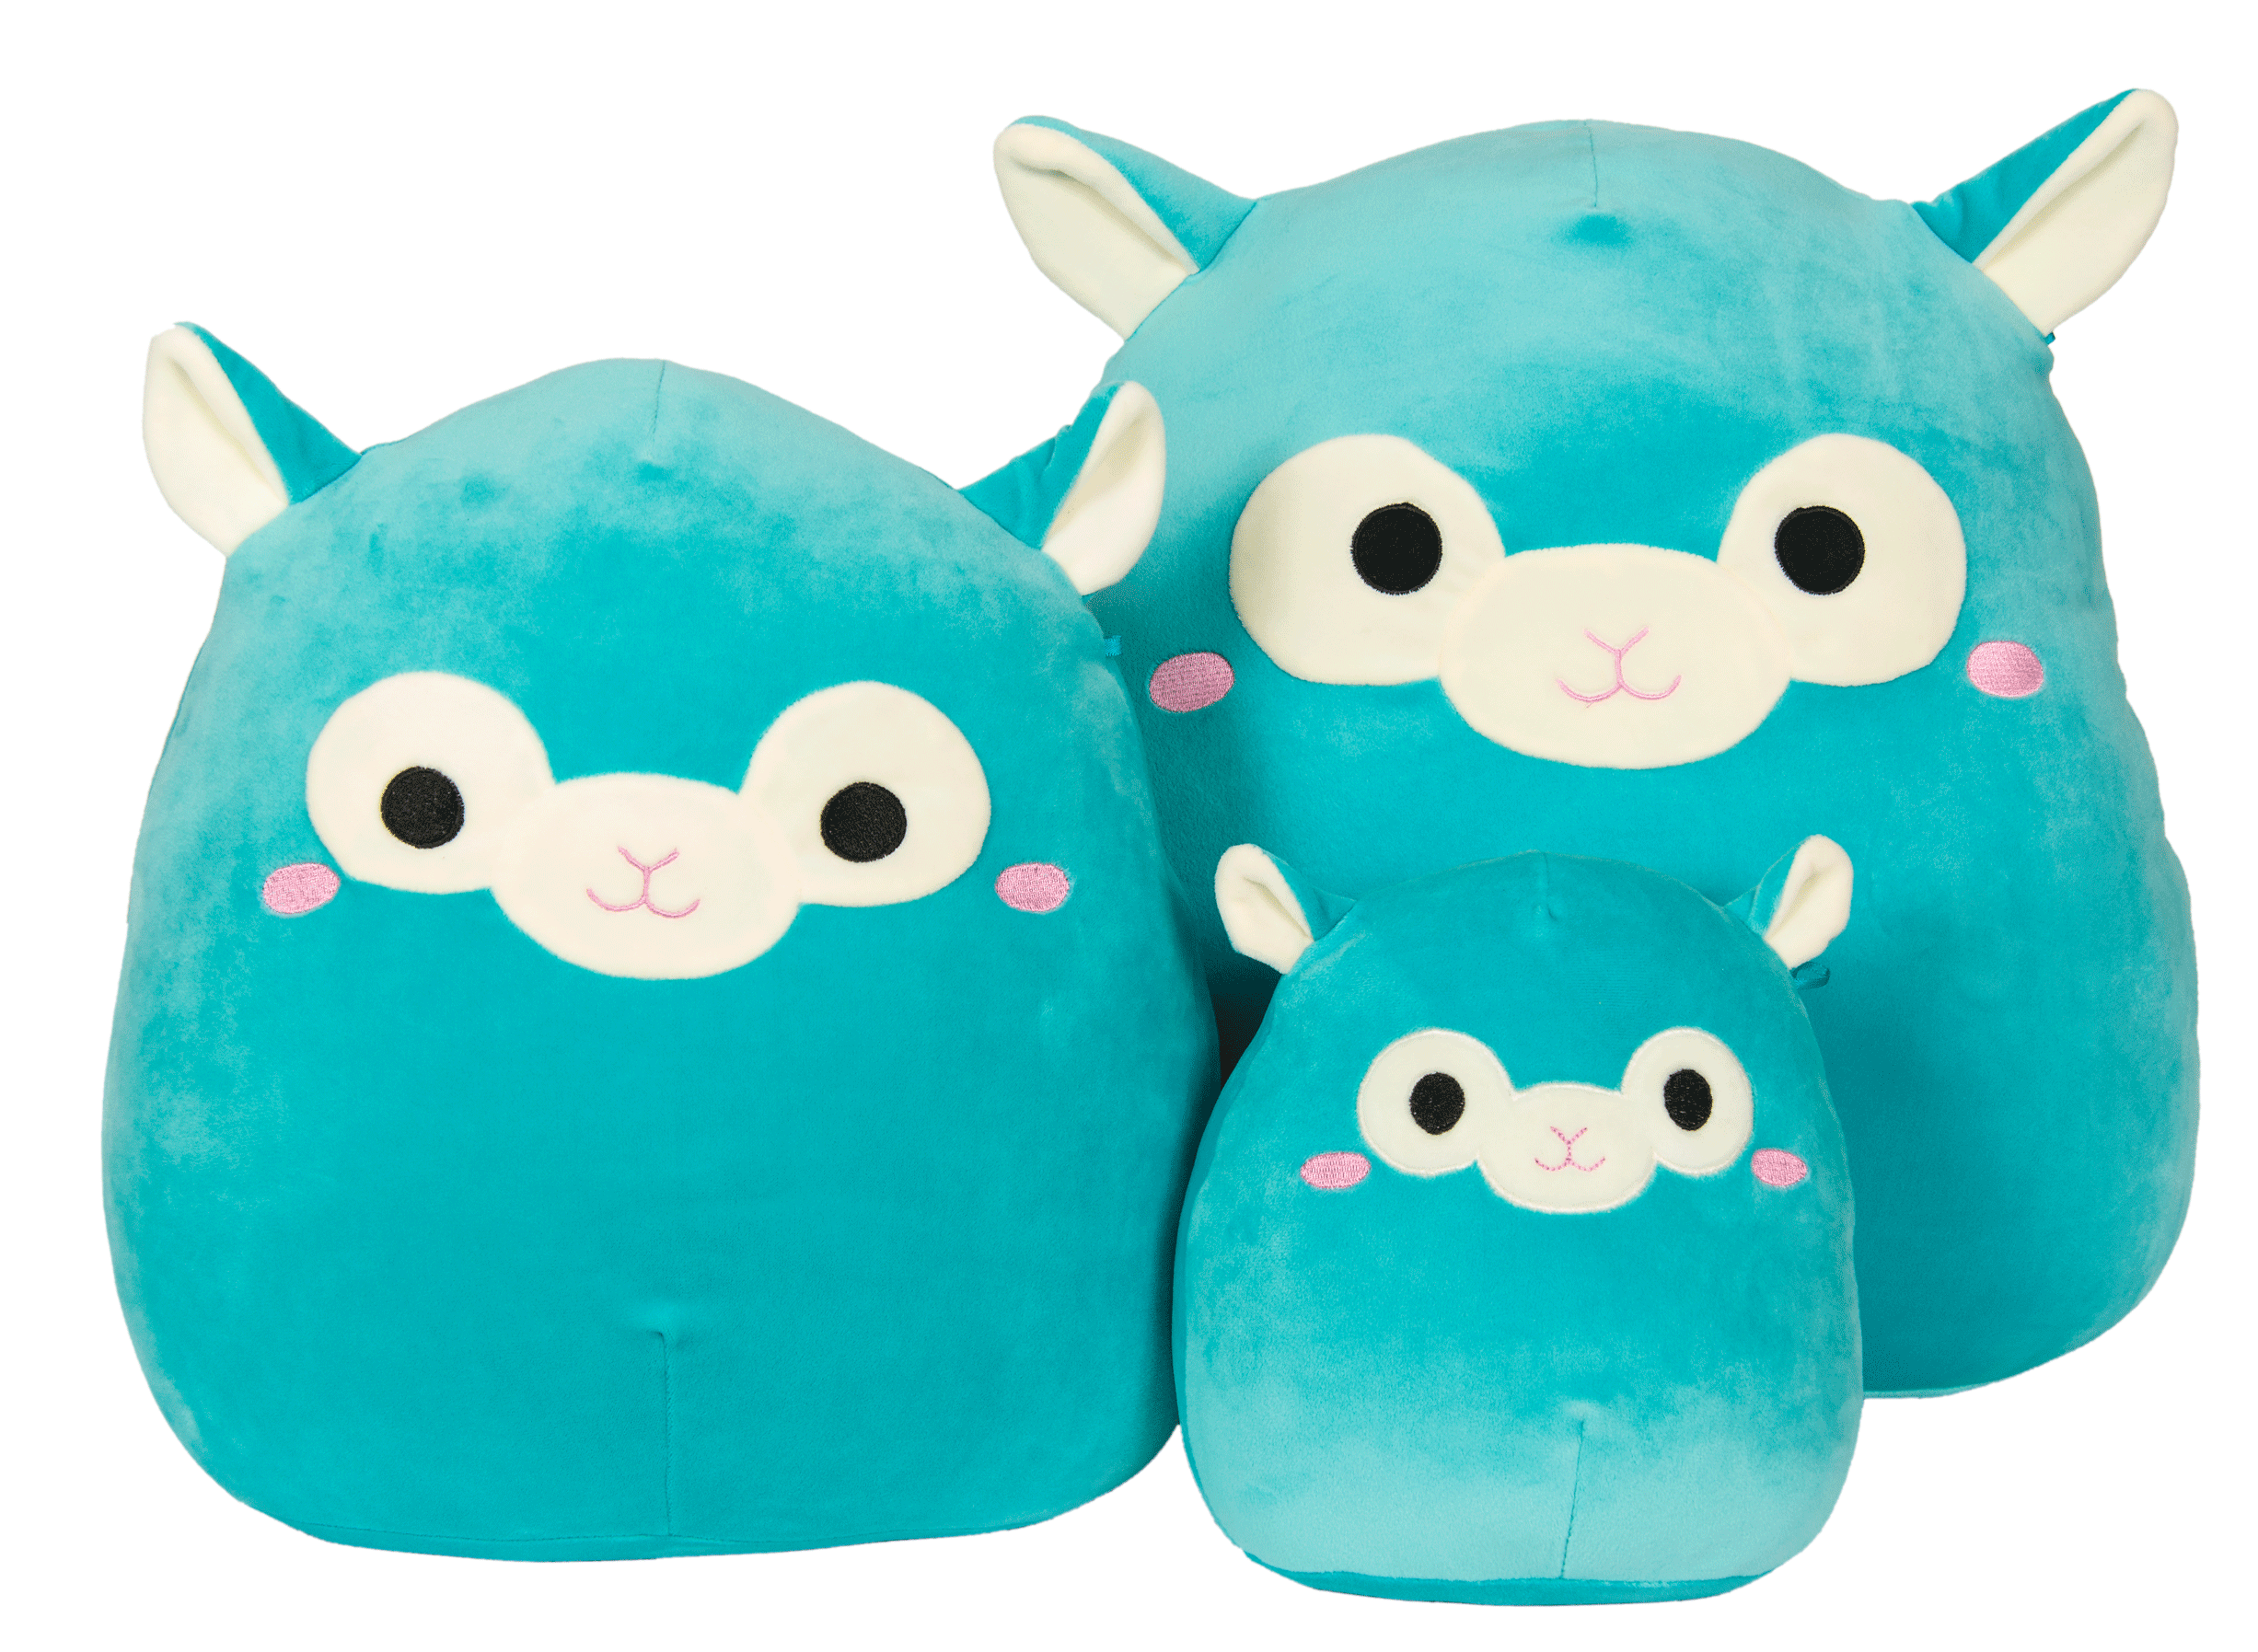 squishmallows wallpapers wallpaper cave on squishmallows wallpapers